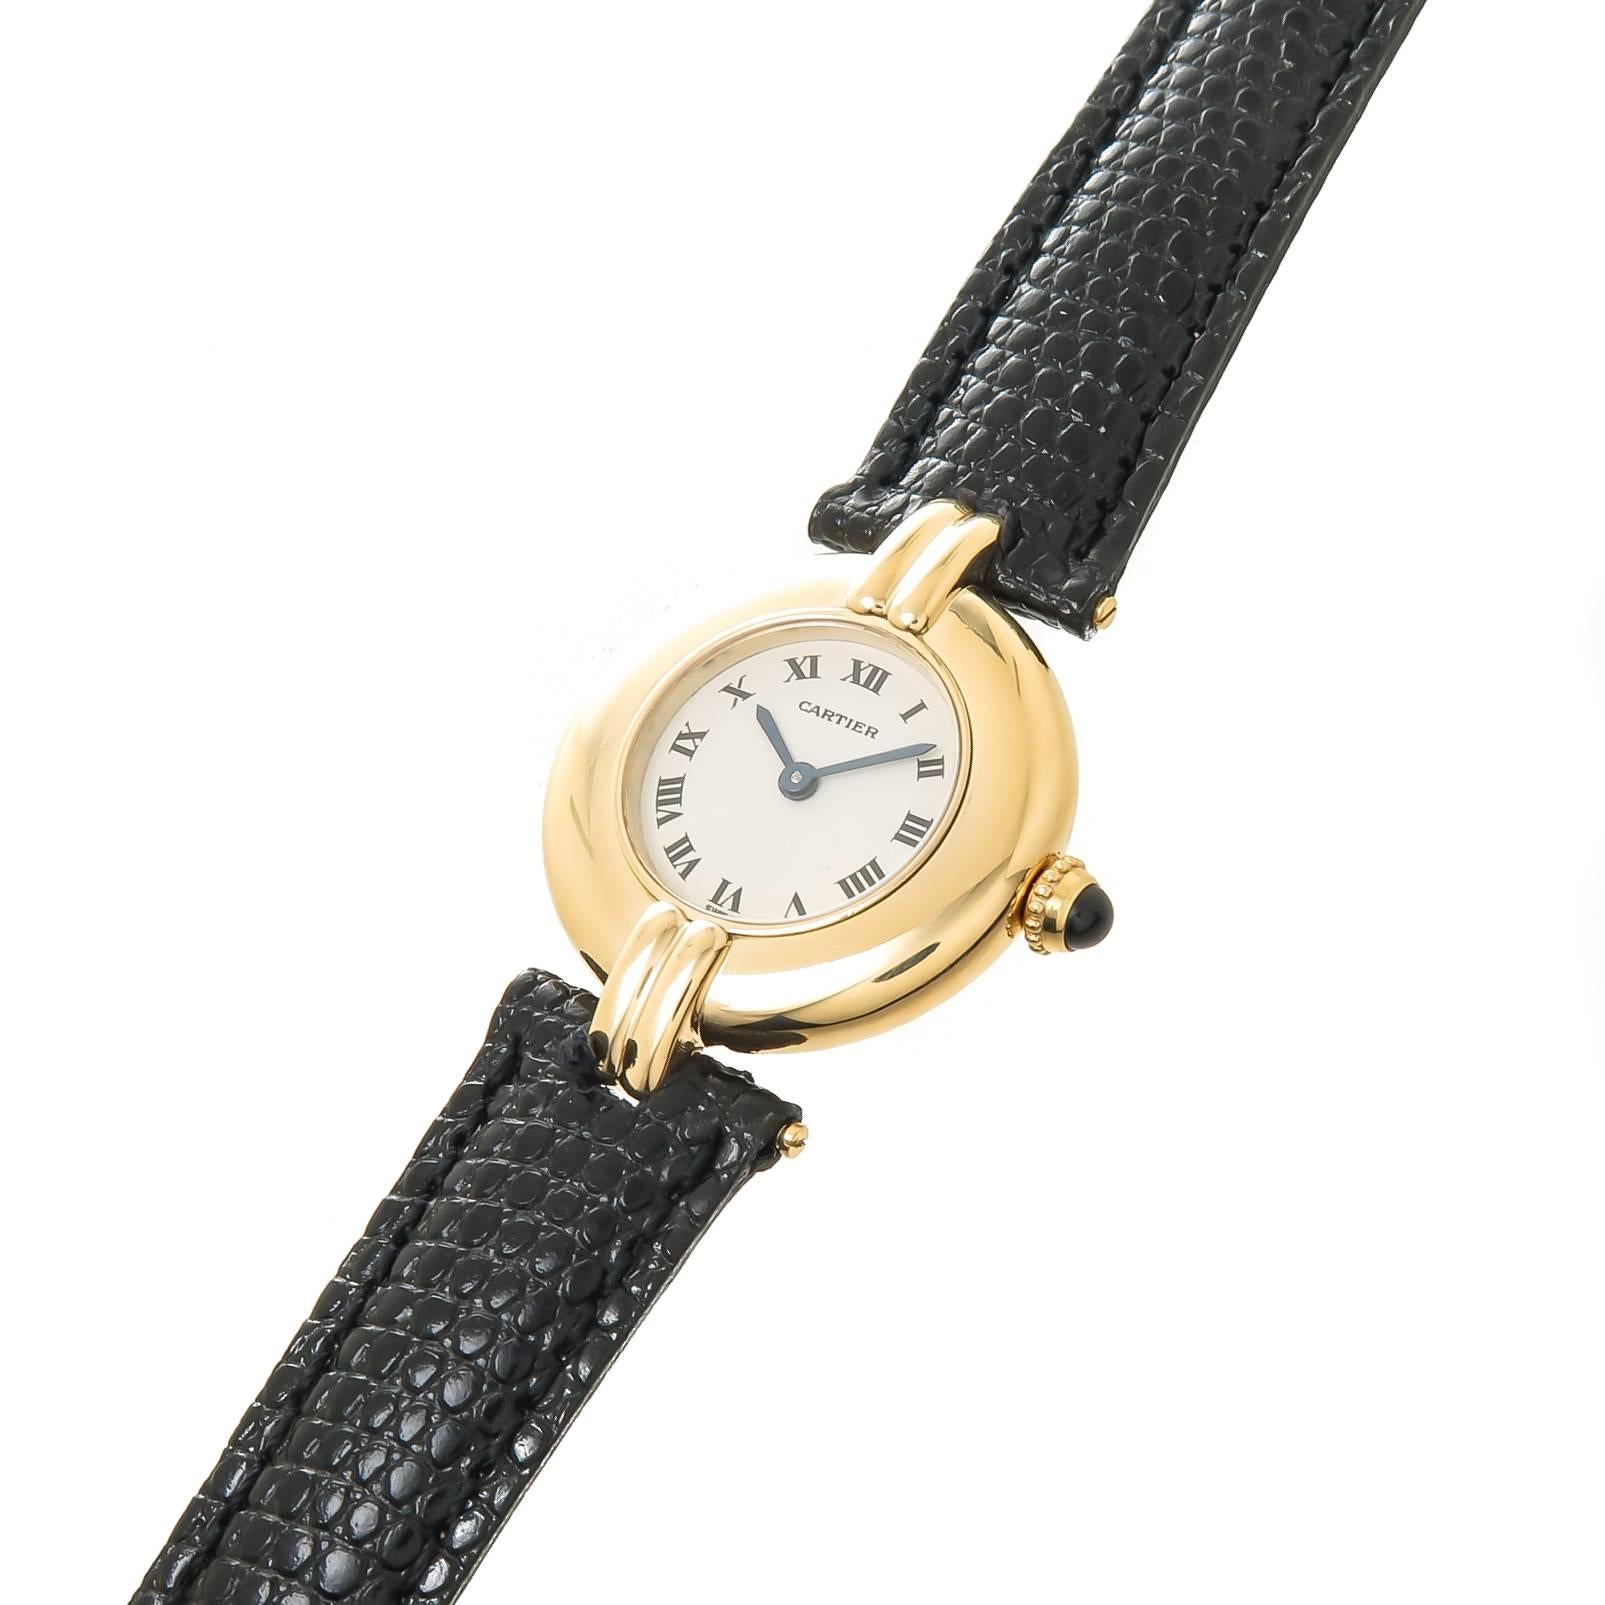 Circa 2000 Cartier Colisee Ladies Wrist Watch, 24 MM 18K Yellow Gold Case, Quartz movement, white Dial with Black Roman Numerals, Sapphire Crown. New Hadley Roma Black Lizard Grain Leather Strap with original Cartier Gold Plate Tang Buckle. Watch